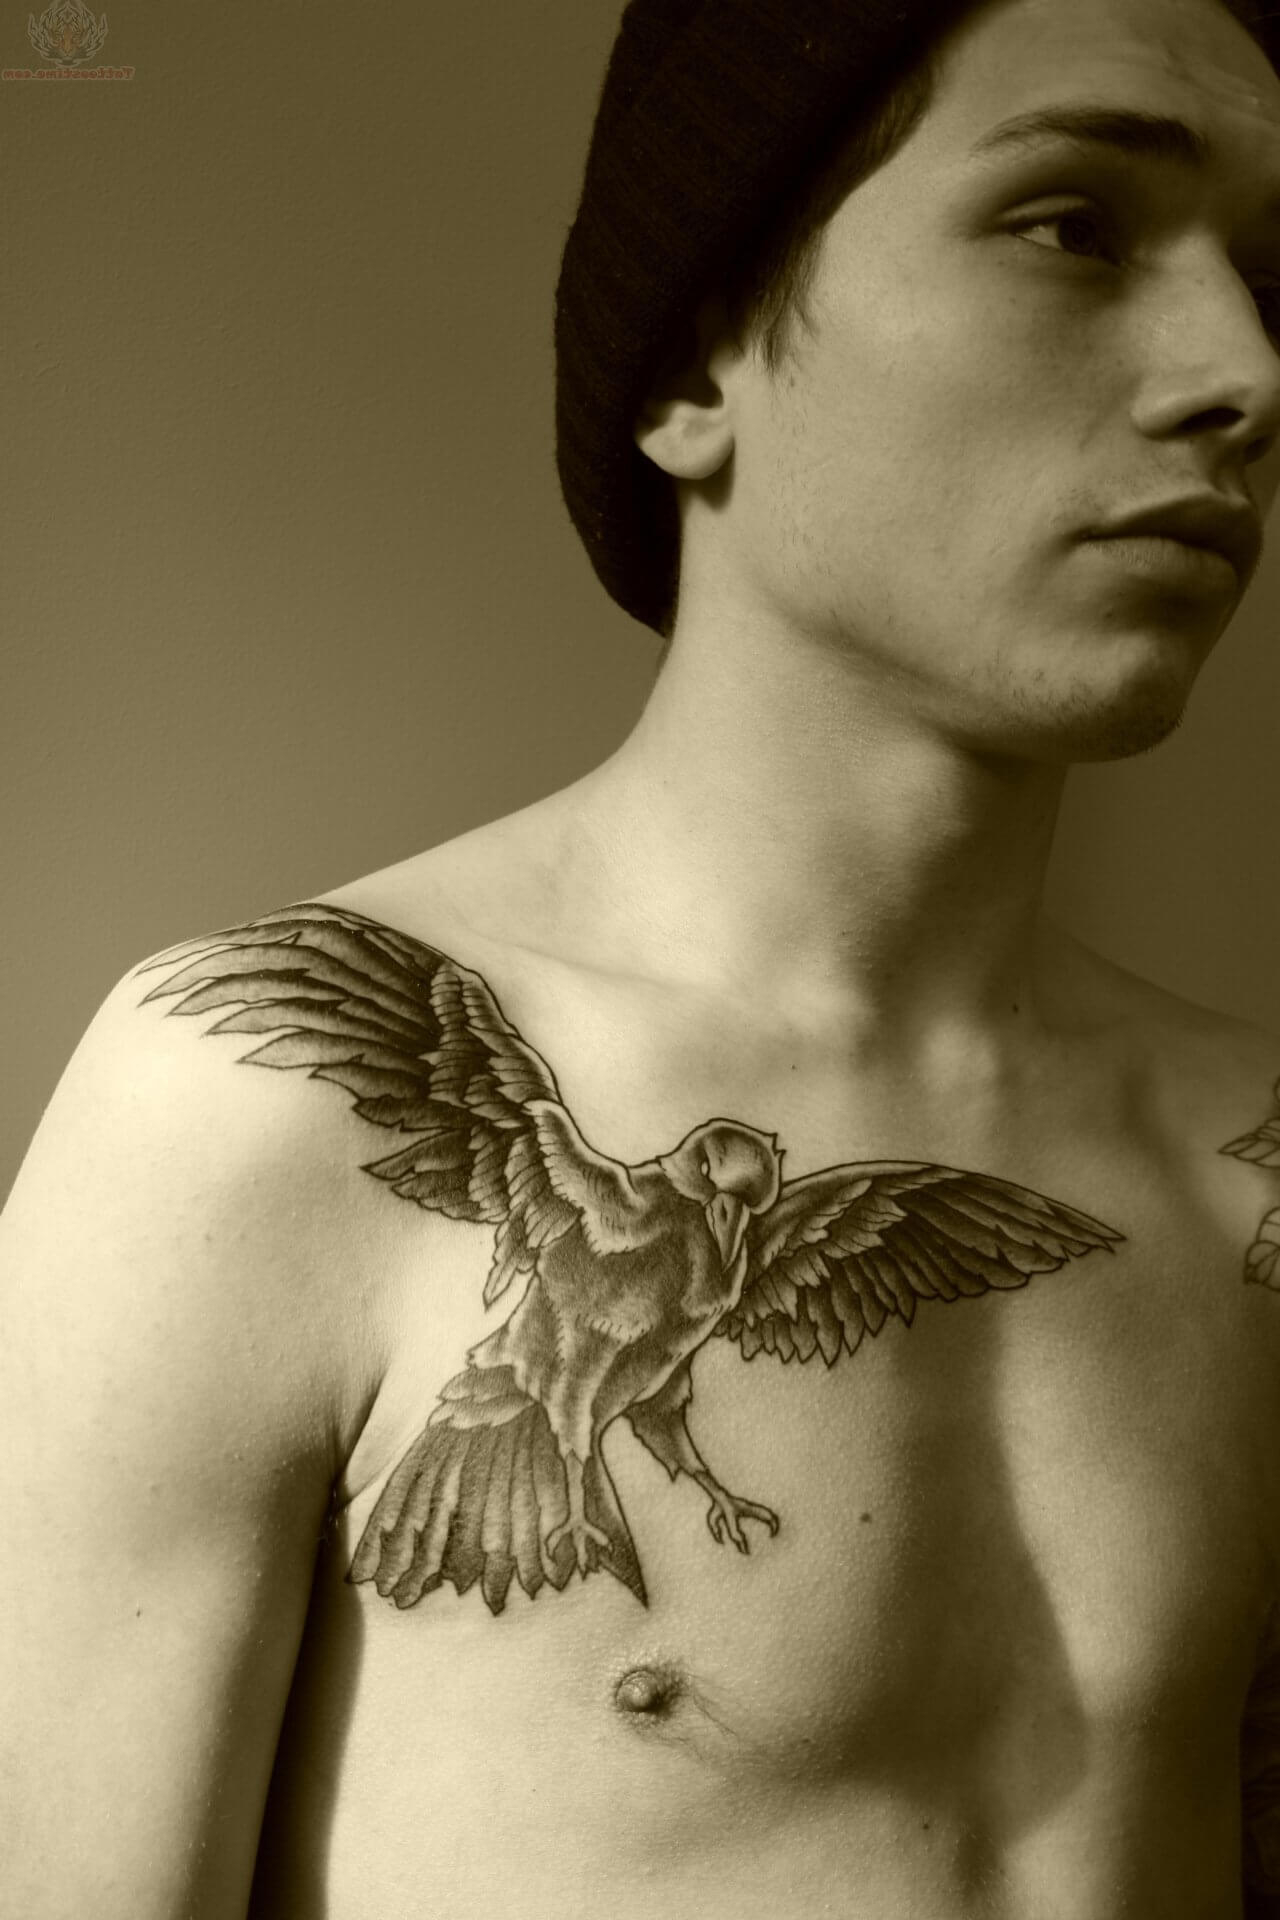 The 100 Best Chest Tattoos For Men Improb in measurements 1280 X 1920